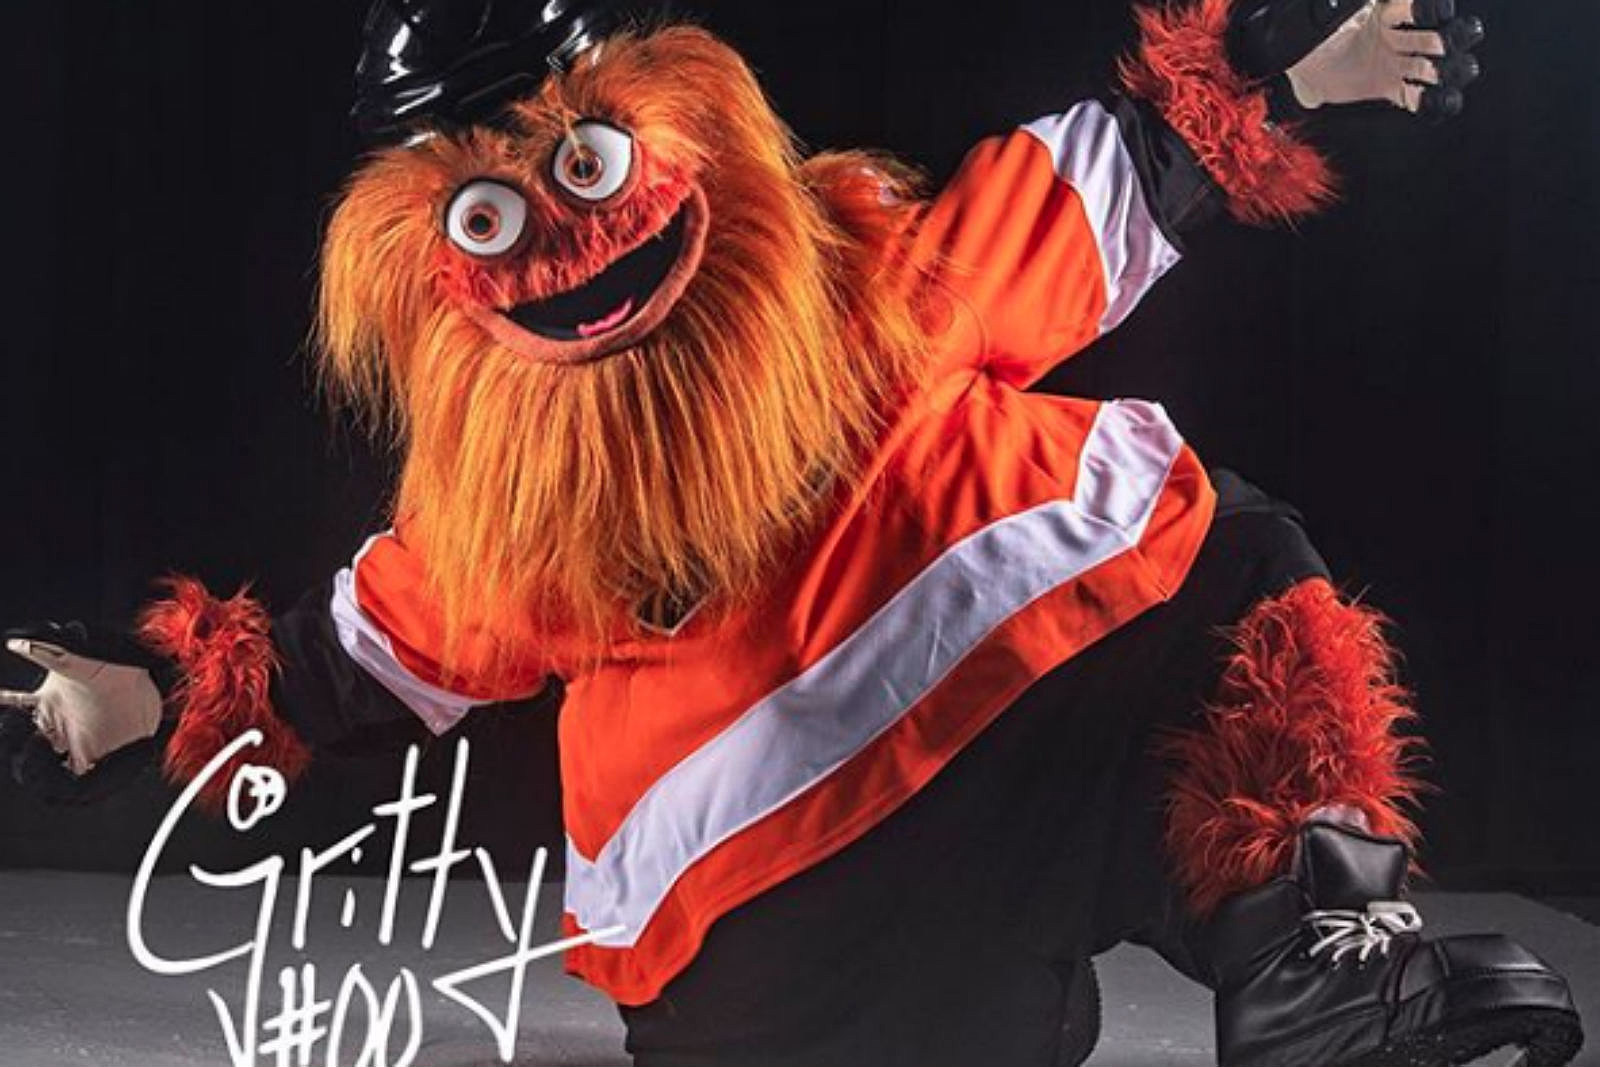 Popular NHL Mascot Gritty To Appear At Maine Mariners Game